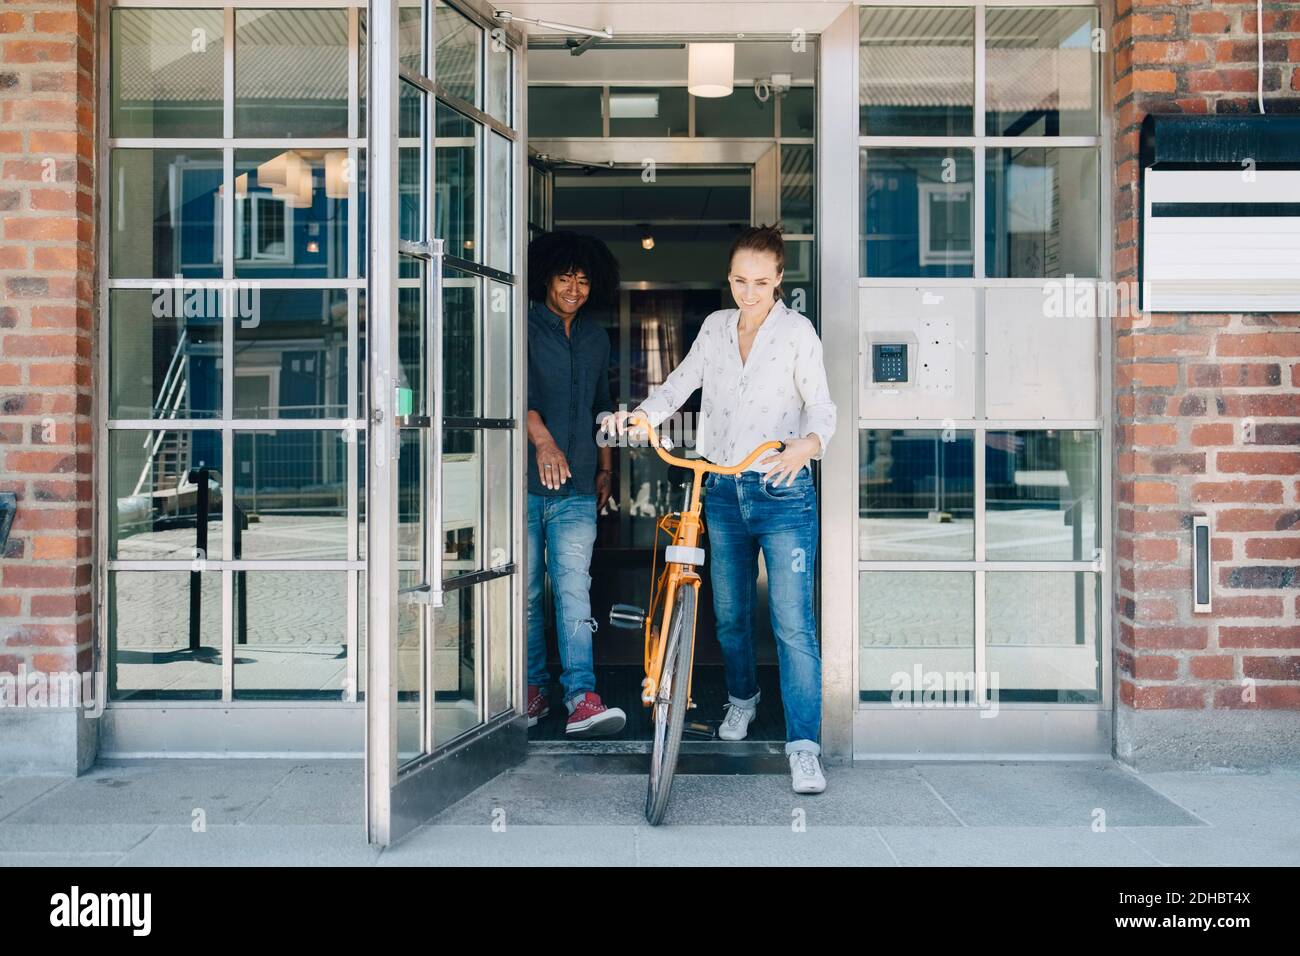 Full length of smiling businesswoman holding bicycle while walking with colleague through doorway at office Stock Photo